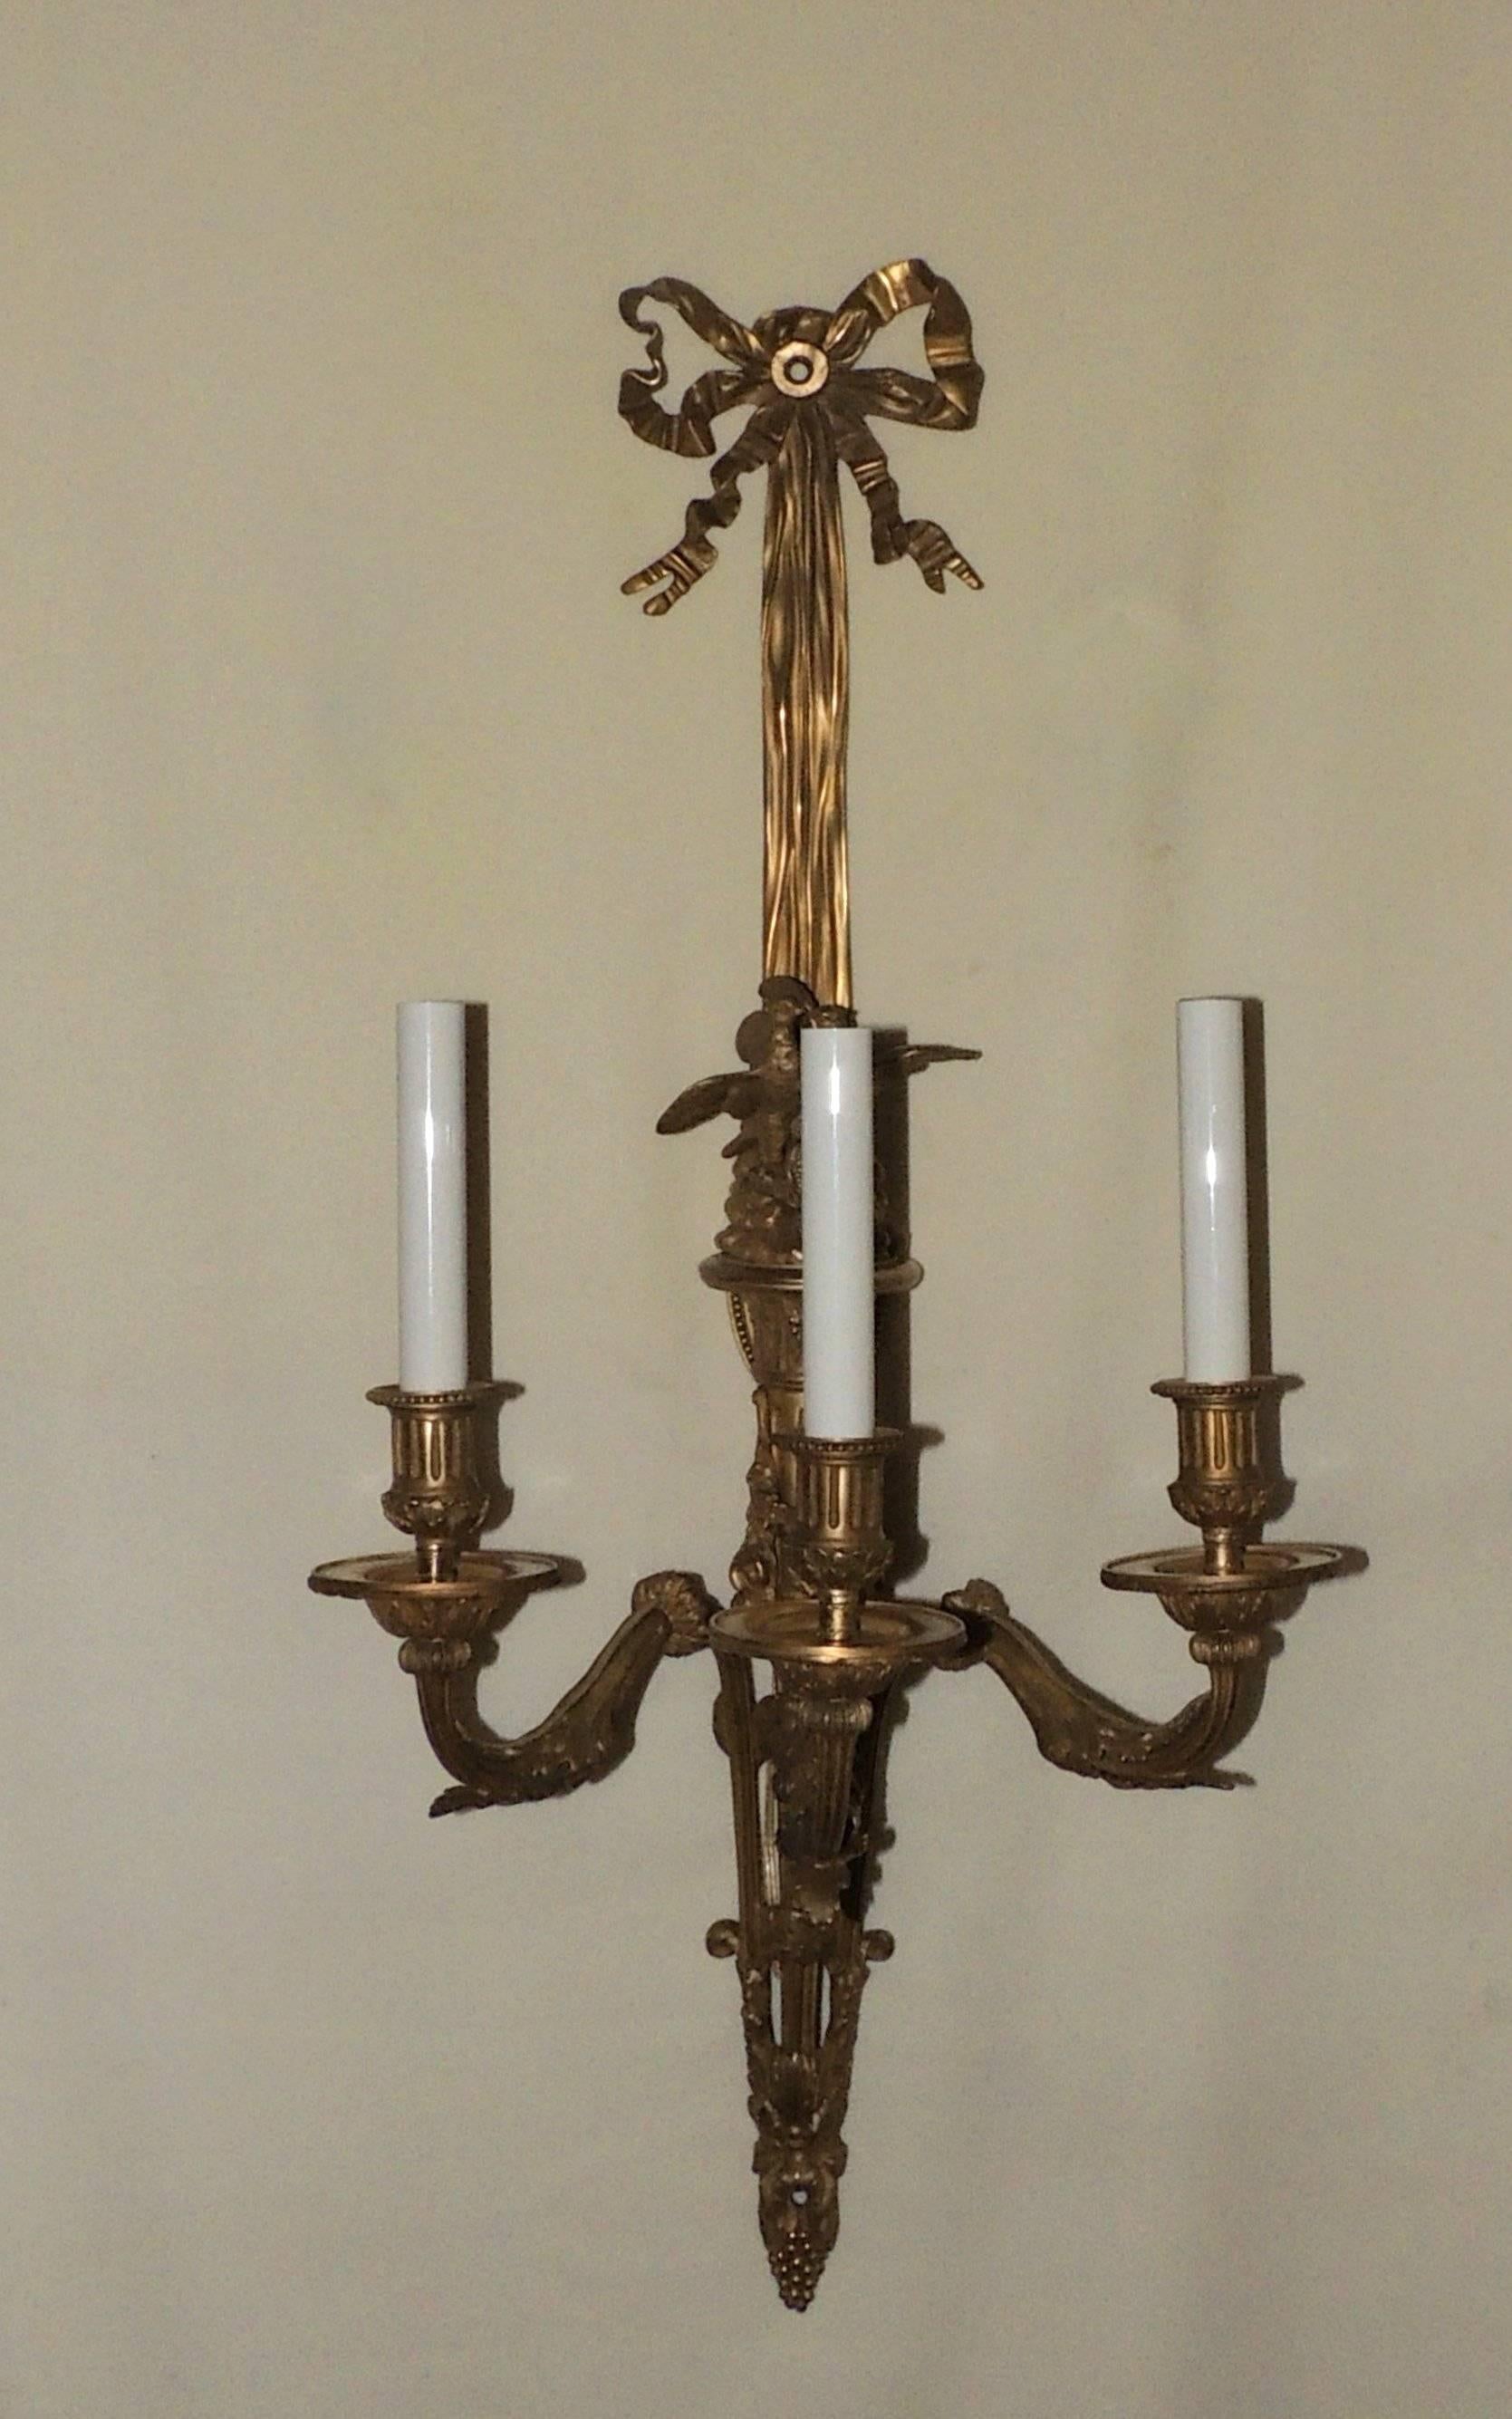 A wonderful pair of dore bronze three-arm sconces with beautiful ribbon bow top,
three arms and a pair of love birds sitting in the centre. Beautiful filigree detail embellishes the three arms and the bottom of these sconces.

Measures: 28